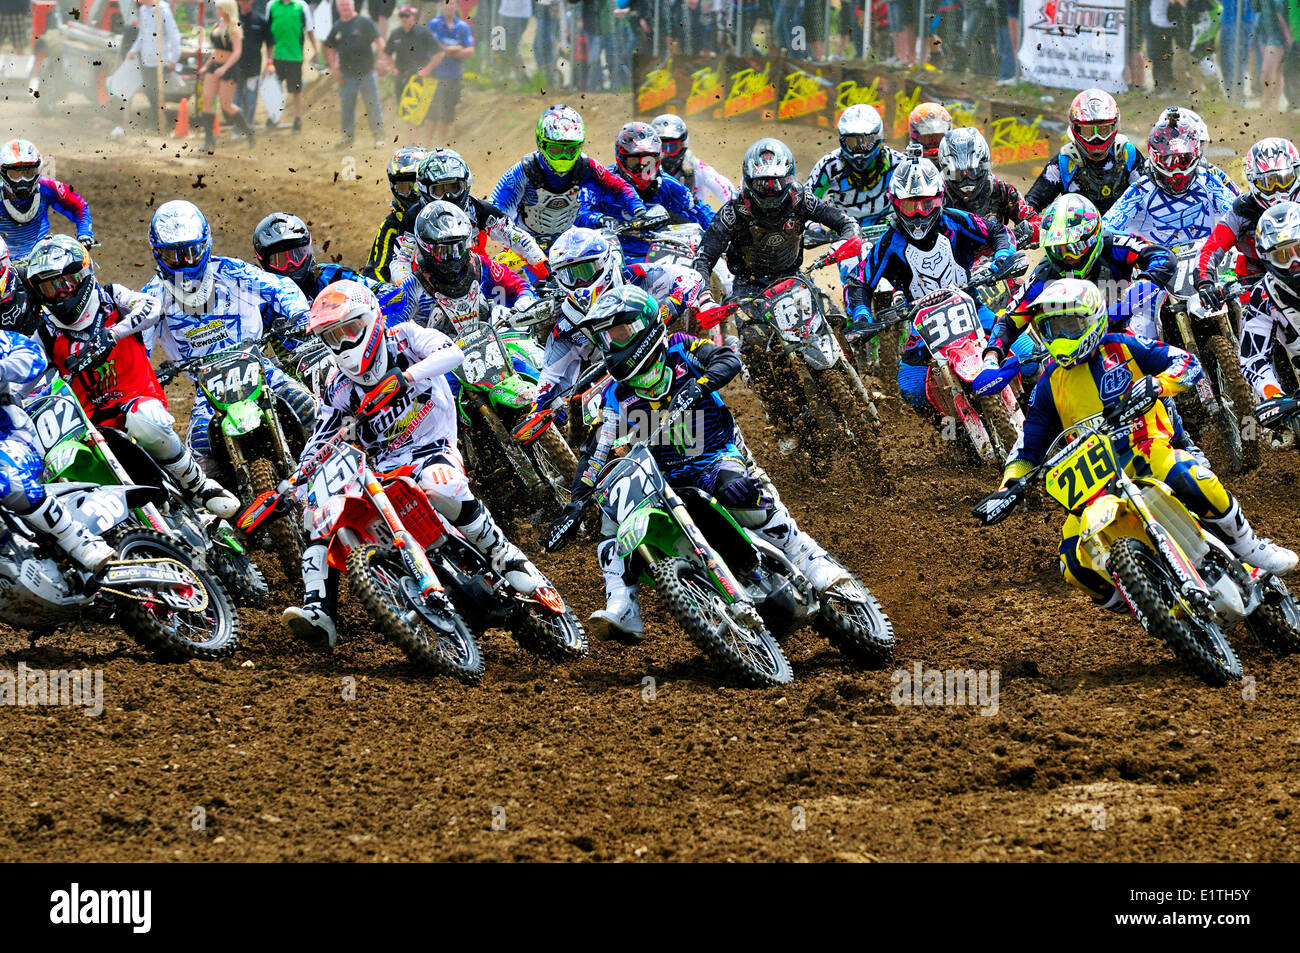 Motocross action at the start of the race during the Monster Energy Motocross Nationals at the Wastelands Track in Nanaimo, BC. Stock Photo